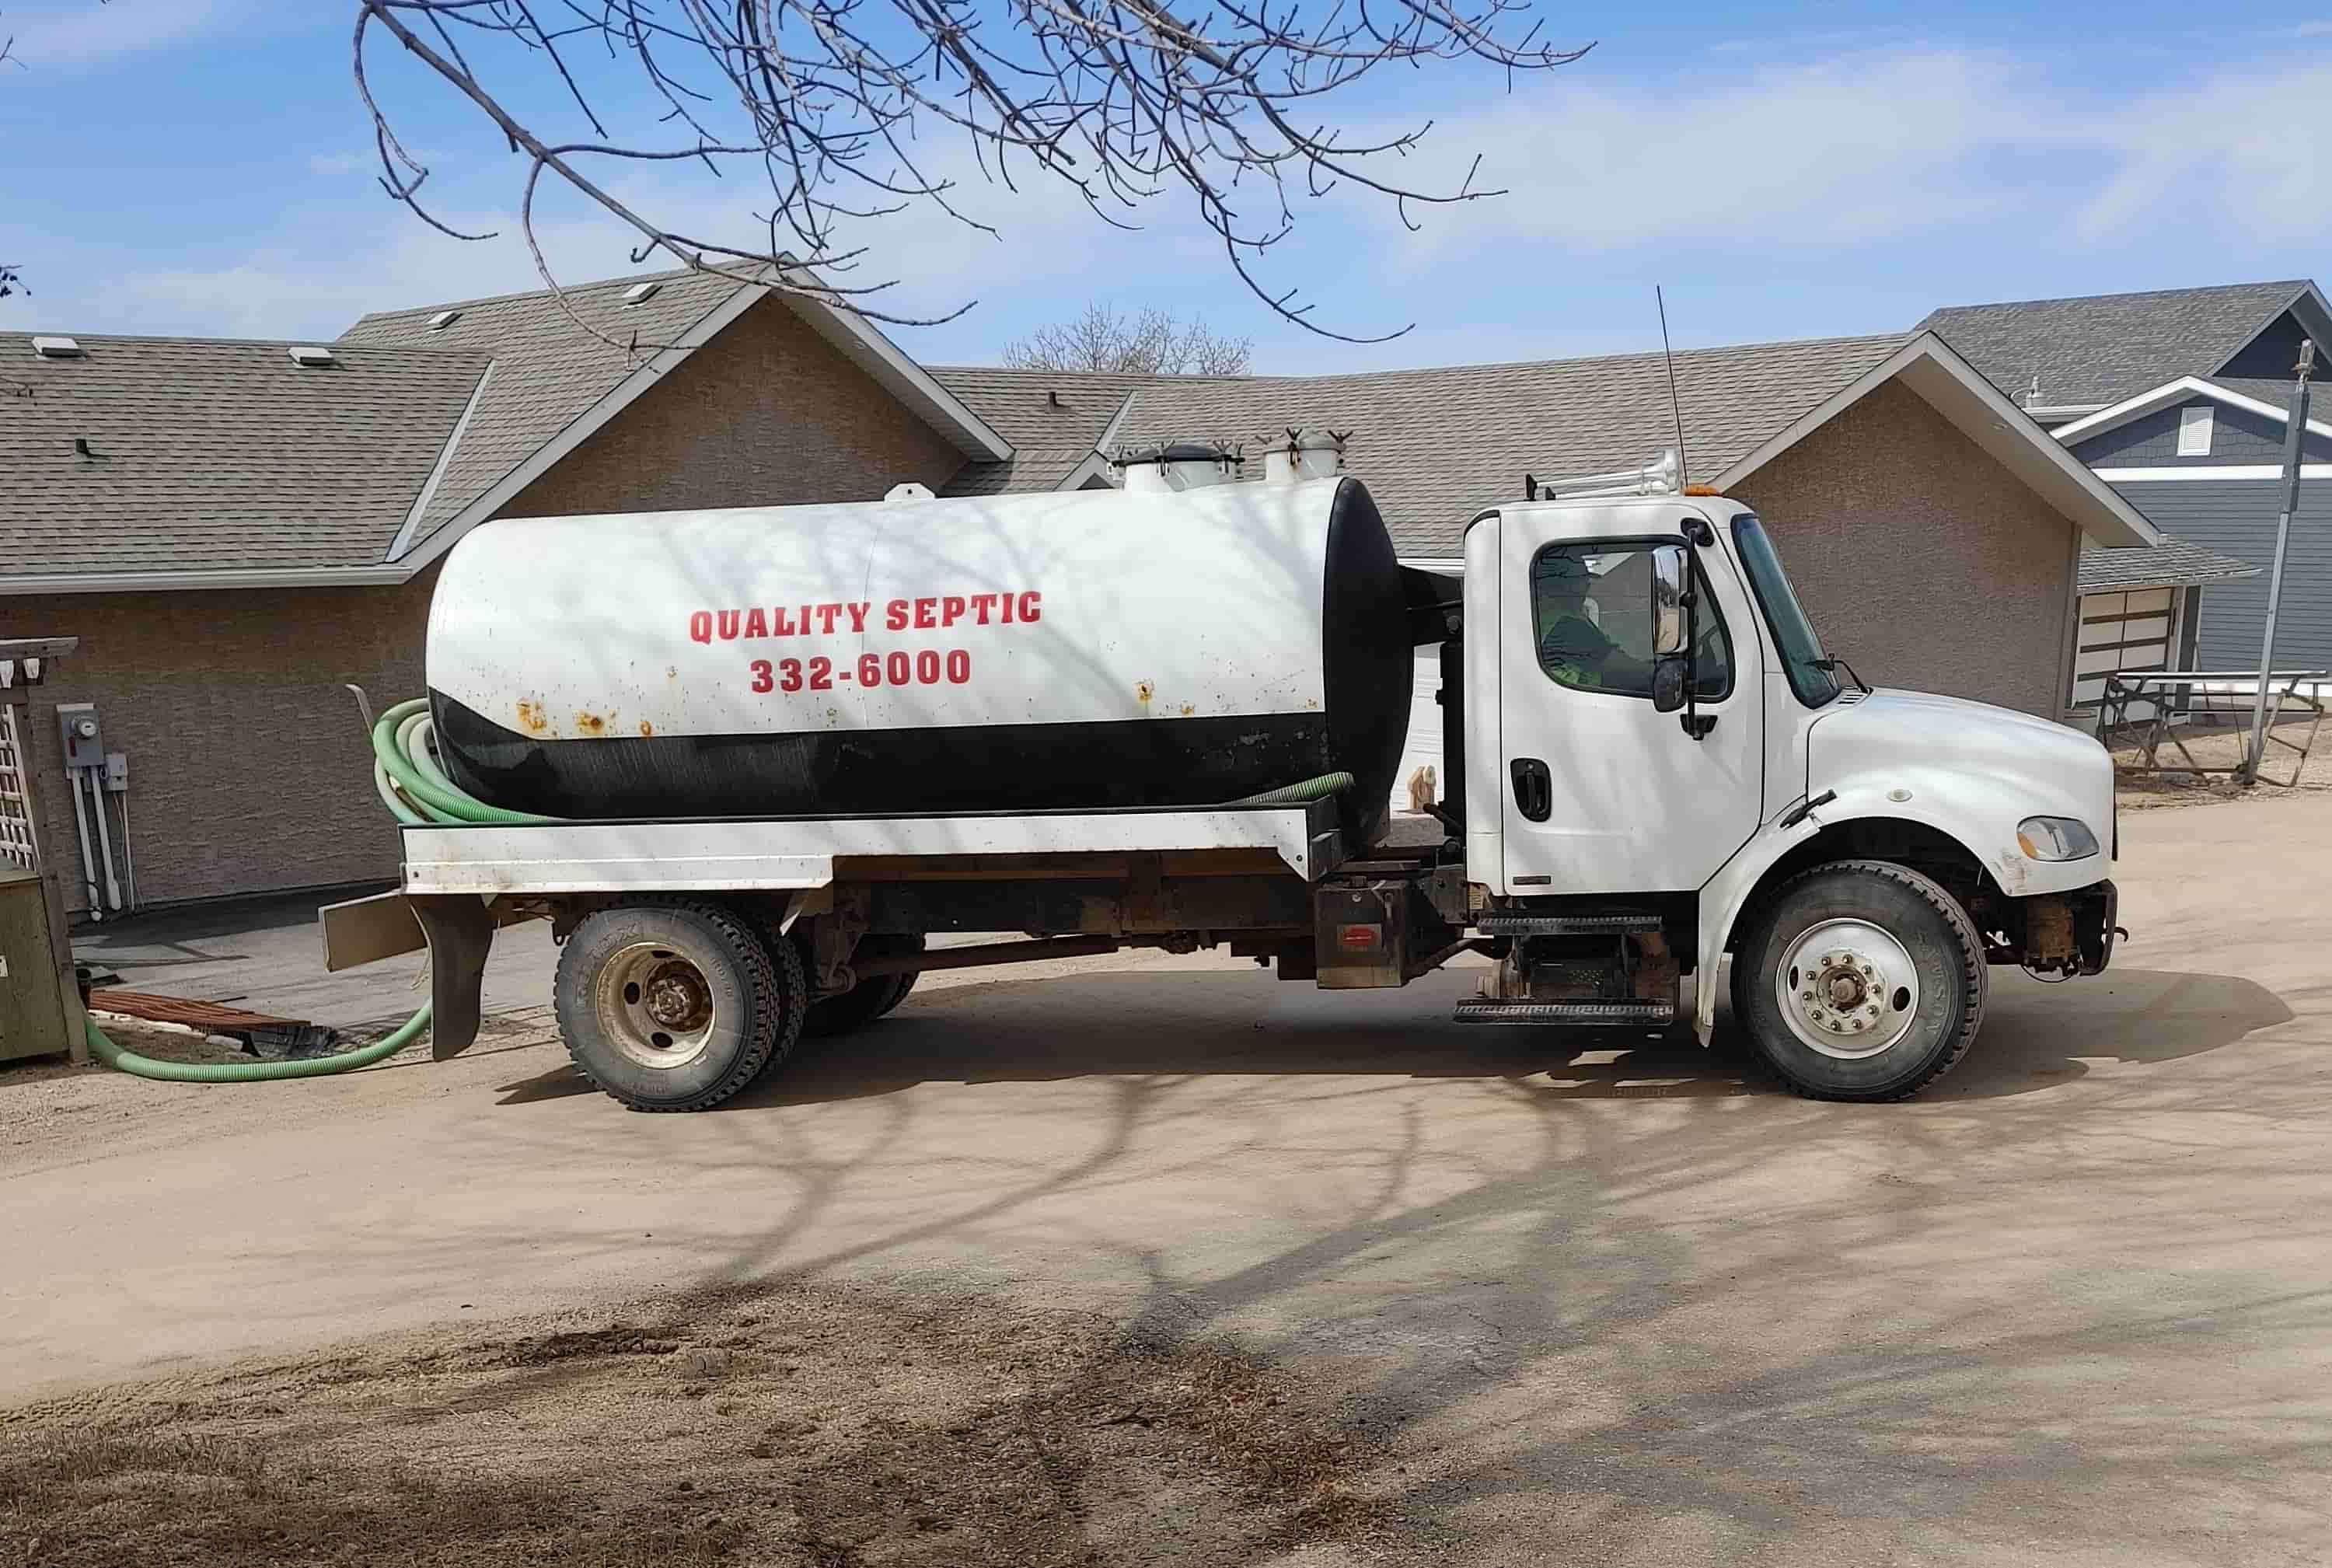 Qulity Septic Services For Sale